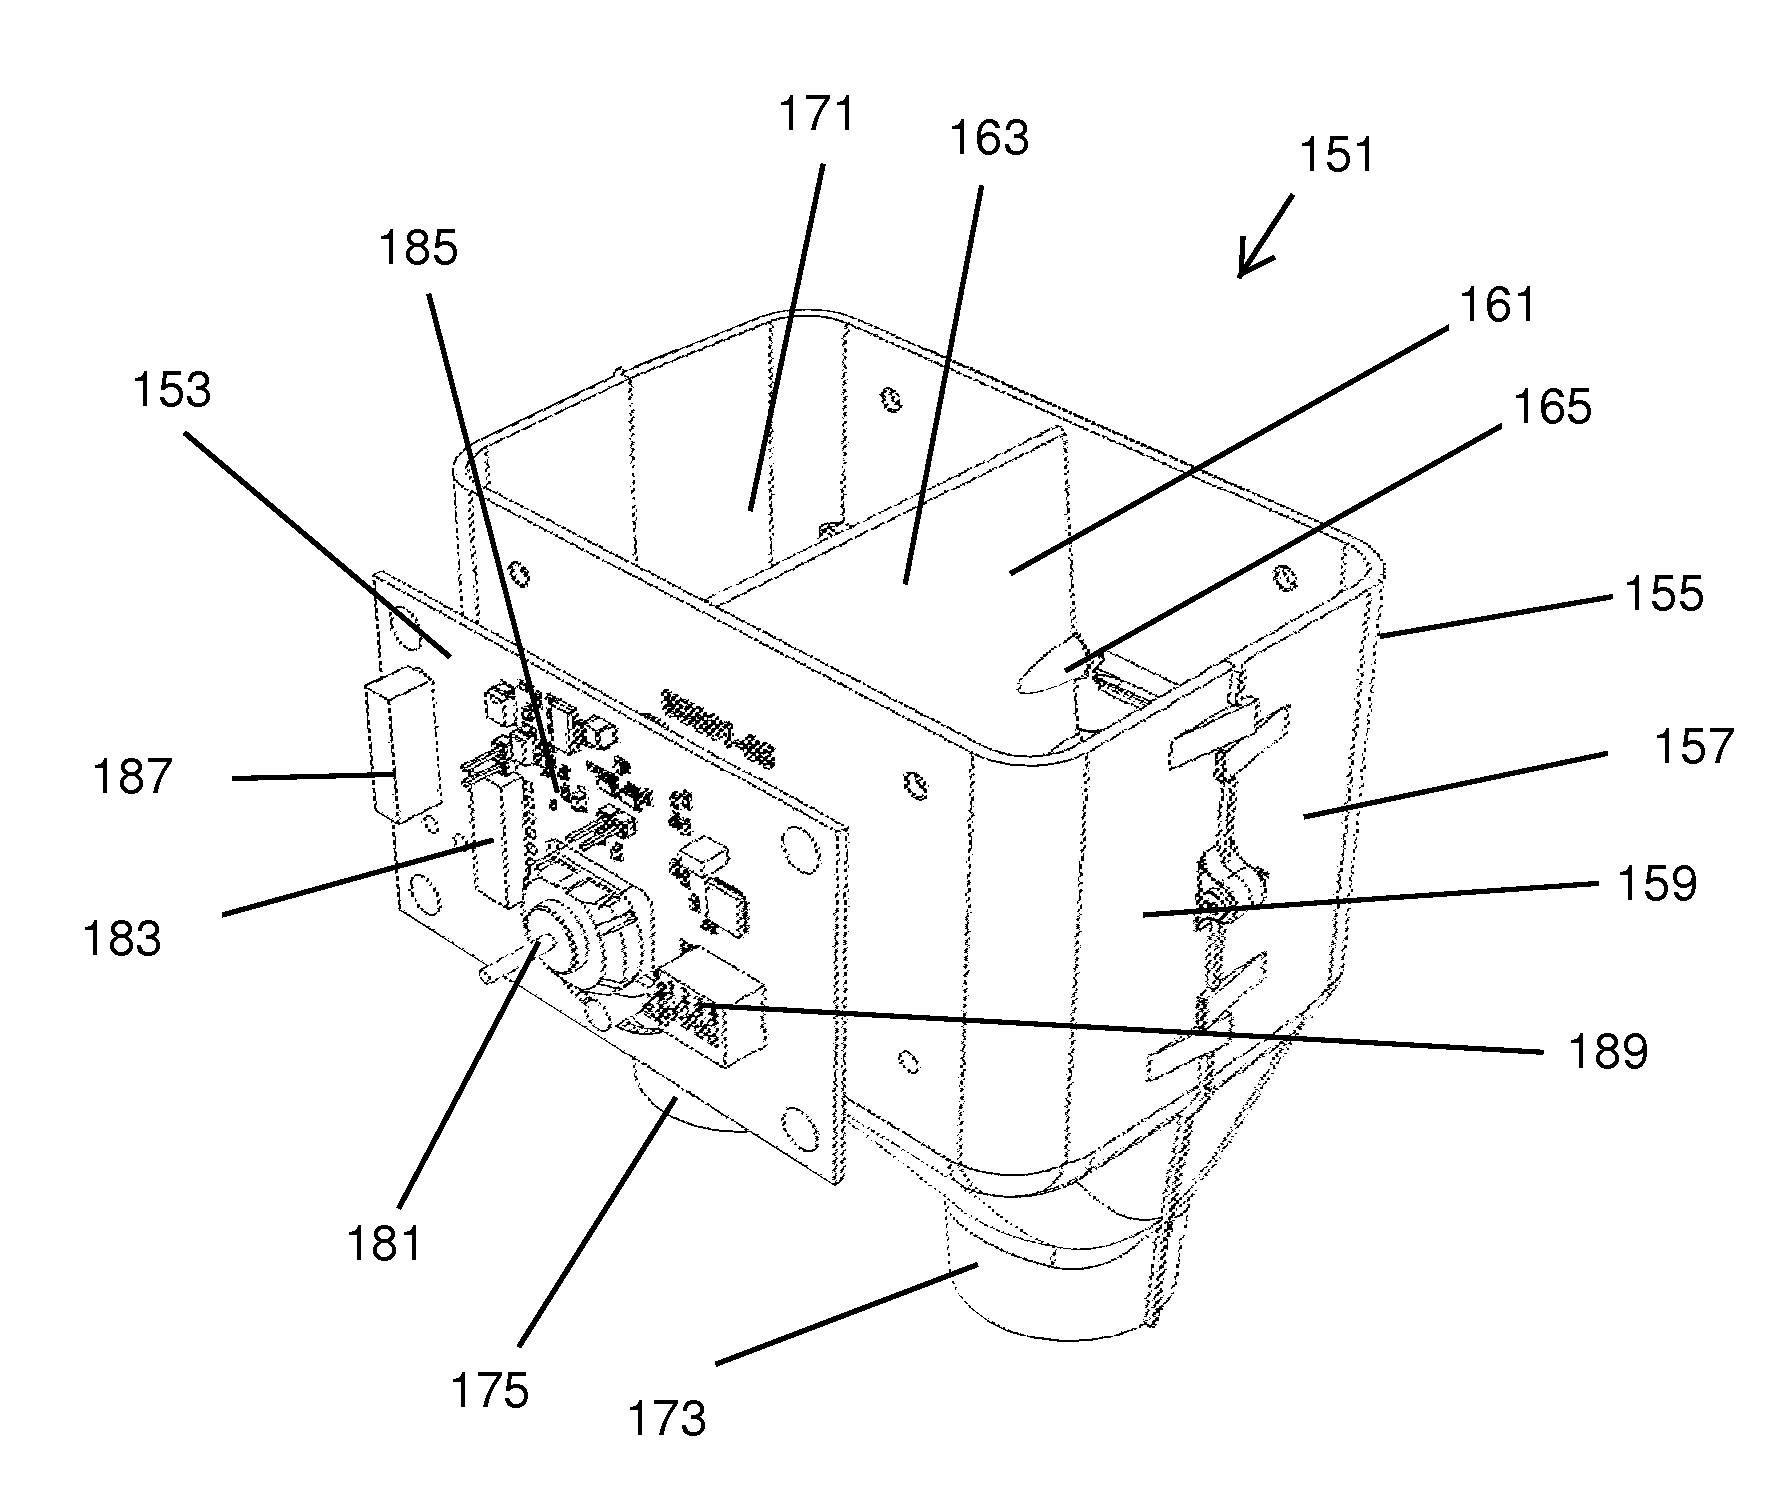 Automated coin operation share allocation device